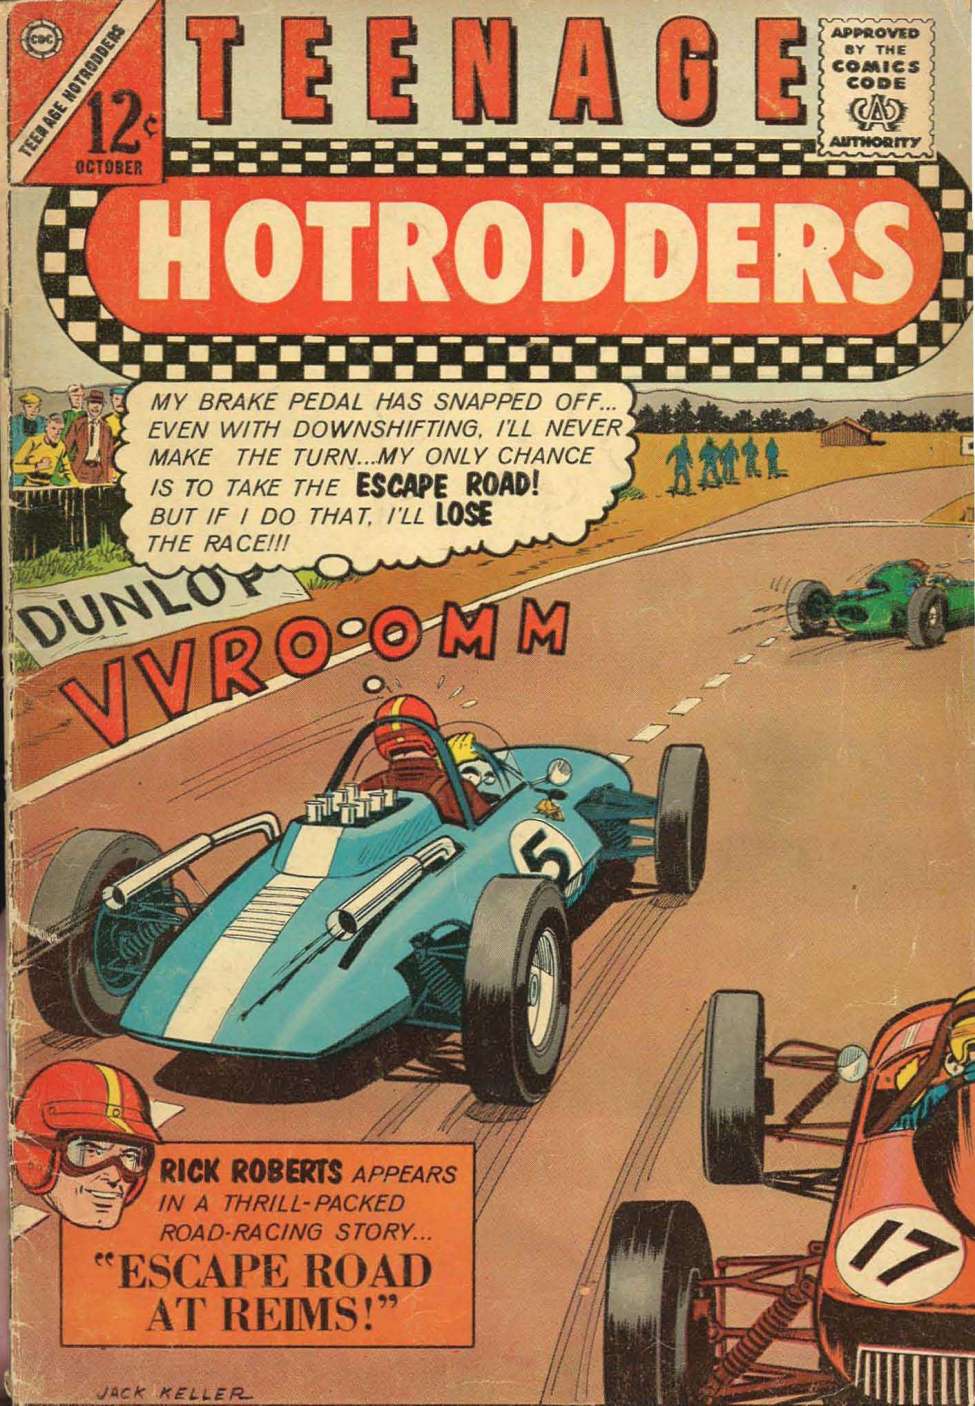 Book Cover For Teenage Hotrodders 4